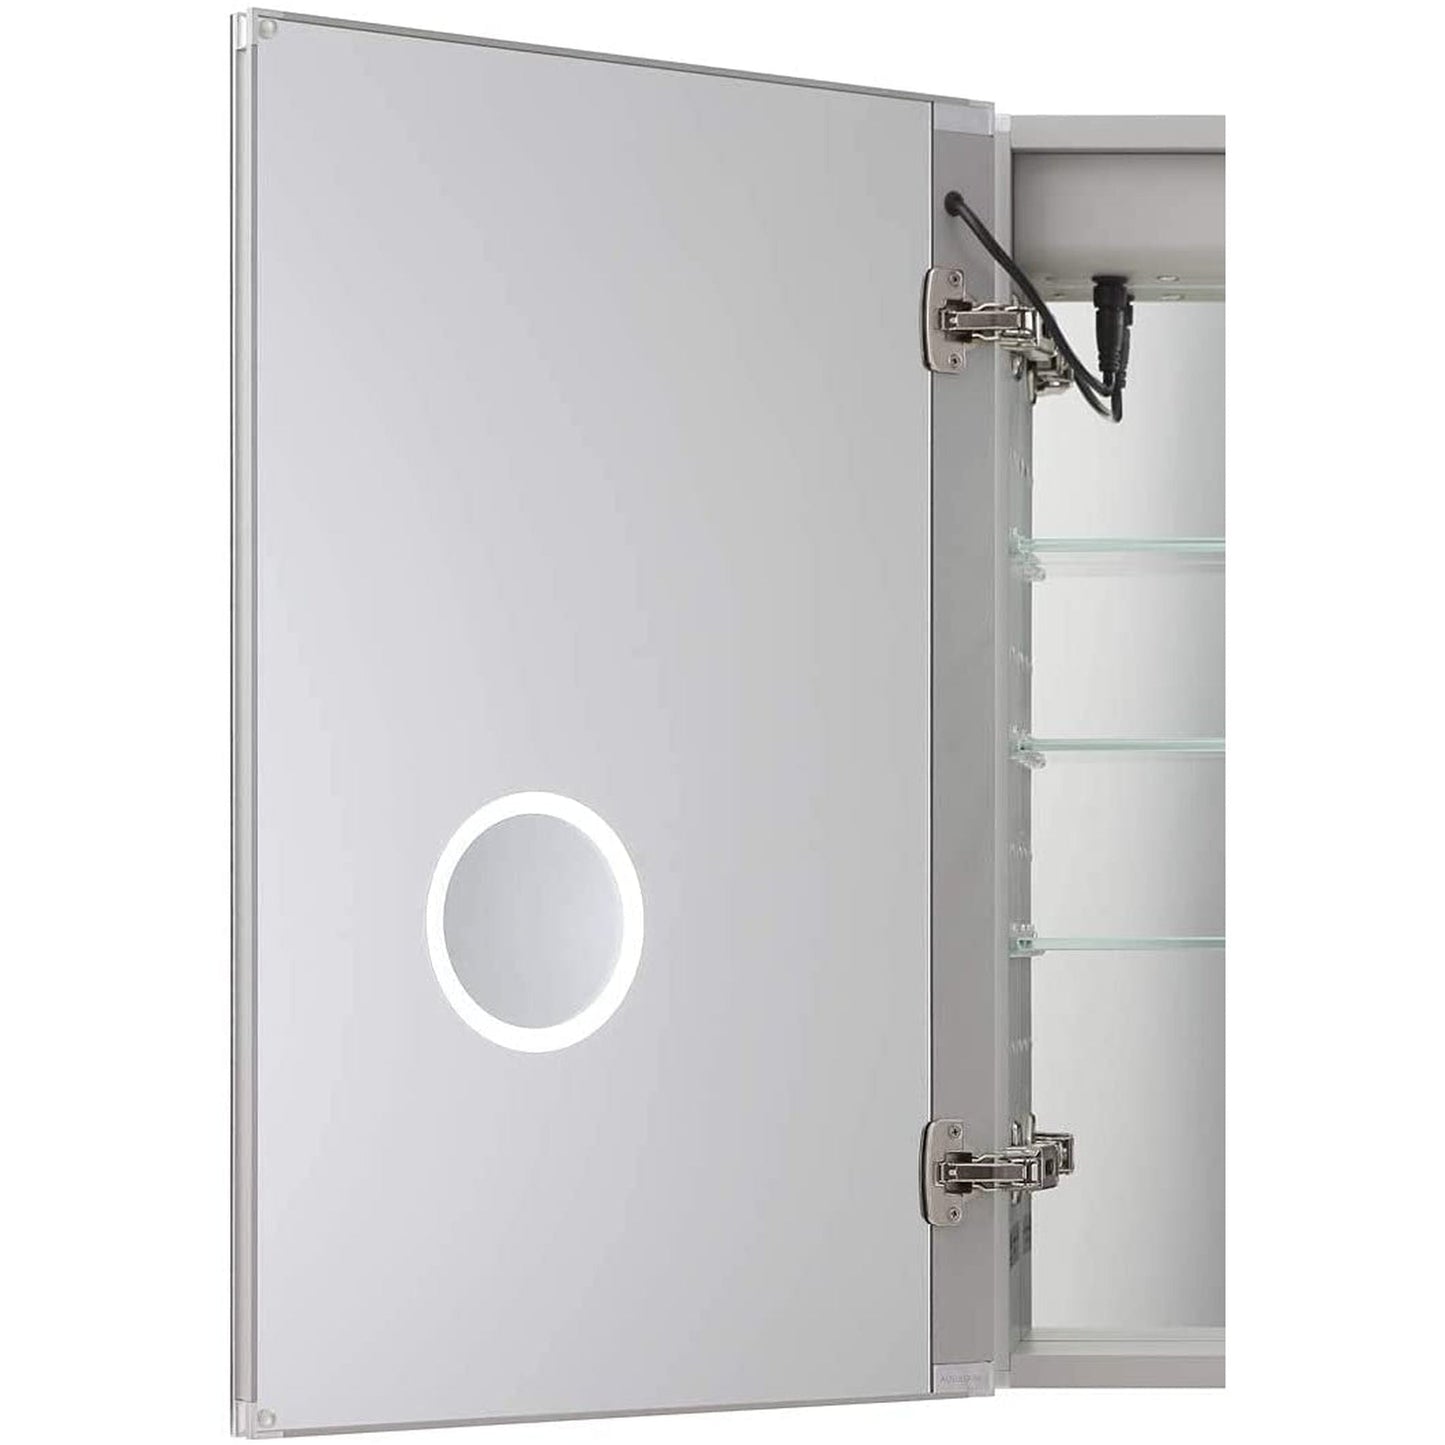 Aquadom Royale Plus 24" x 30" Rectangle Recessed or Surface Mount Single View Left Hinged LED Lighted Bathroom Medicine Cabinet With Defogger, Electrical Outlet, Magnifying Mirror